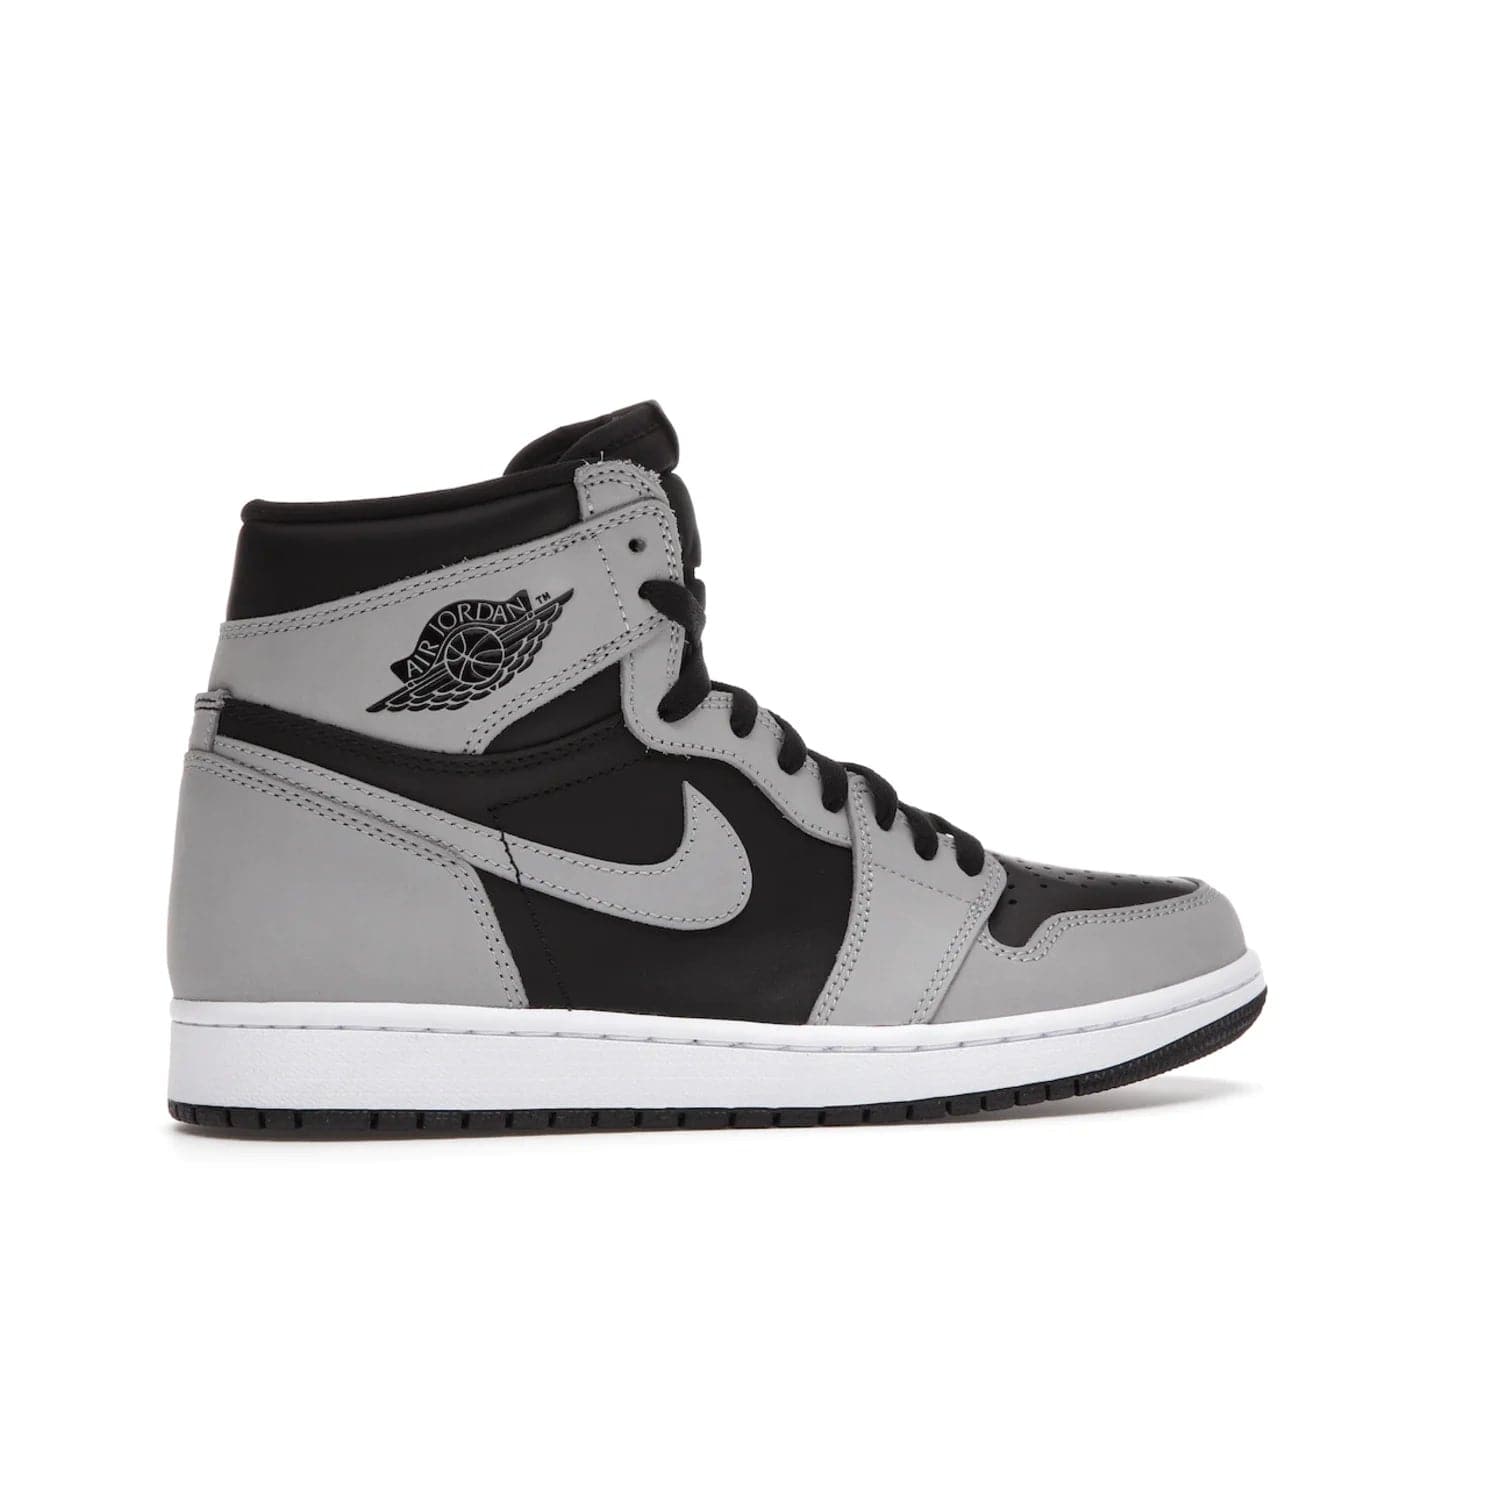 Jordan 1 Retro High Shadow 2.0 - Image 35 - Only at www.BallersClubKickz.com - #
Classic Air Jordan 1 Retro High Shadow 2.0 with black leather base and Light Smoke Grey overlays. Released in May 2021.